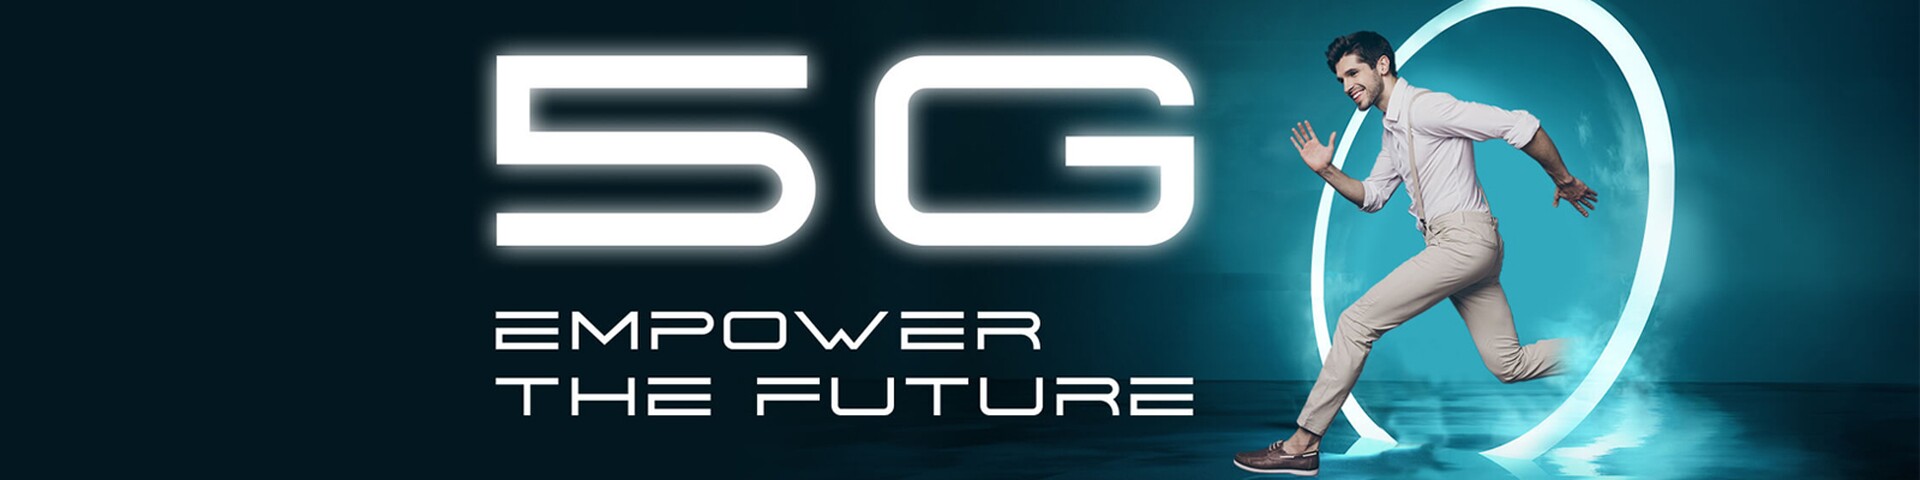 Empowering the future with 5G